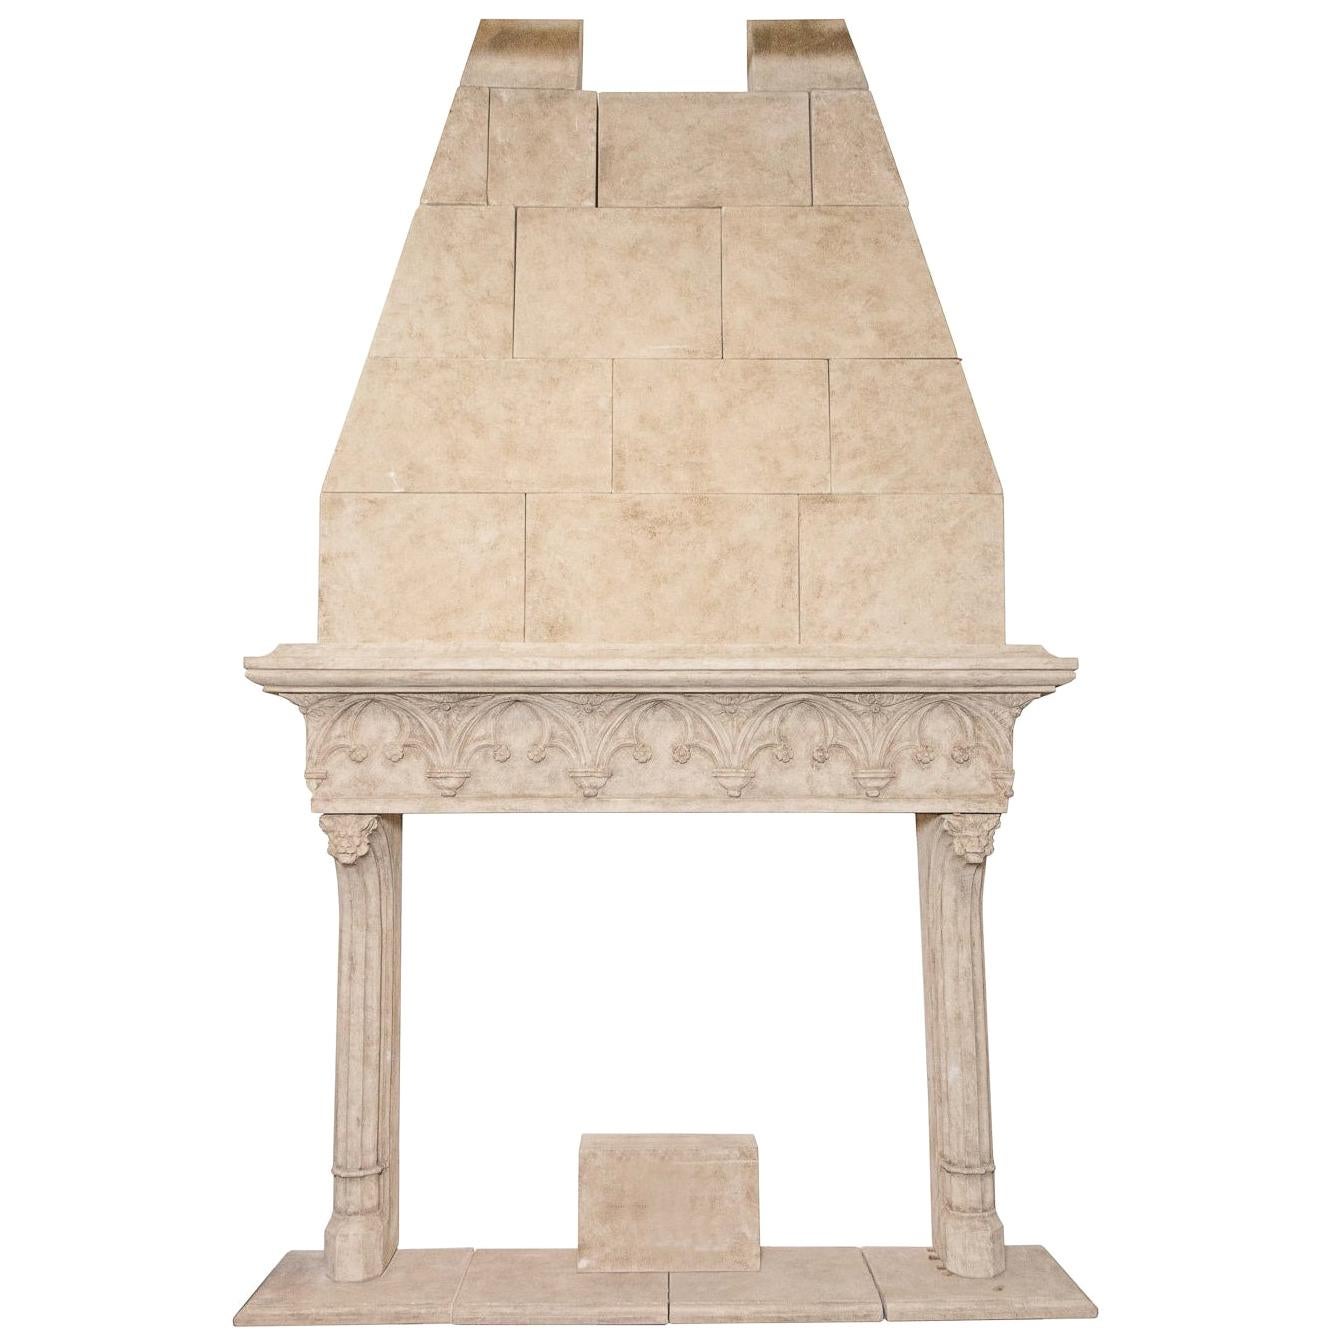 Neo-Gothic Style Composite Limestone Fireplace with Hood